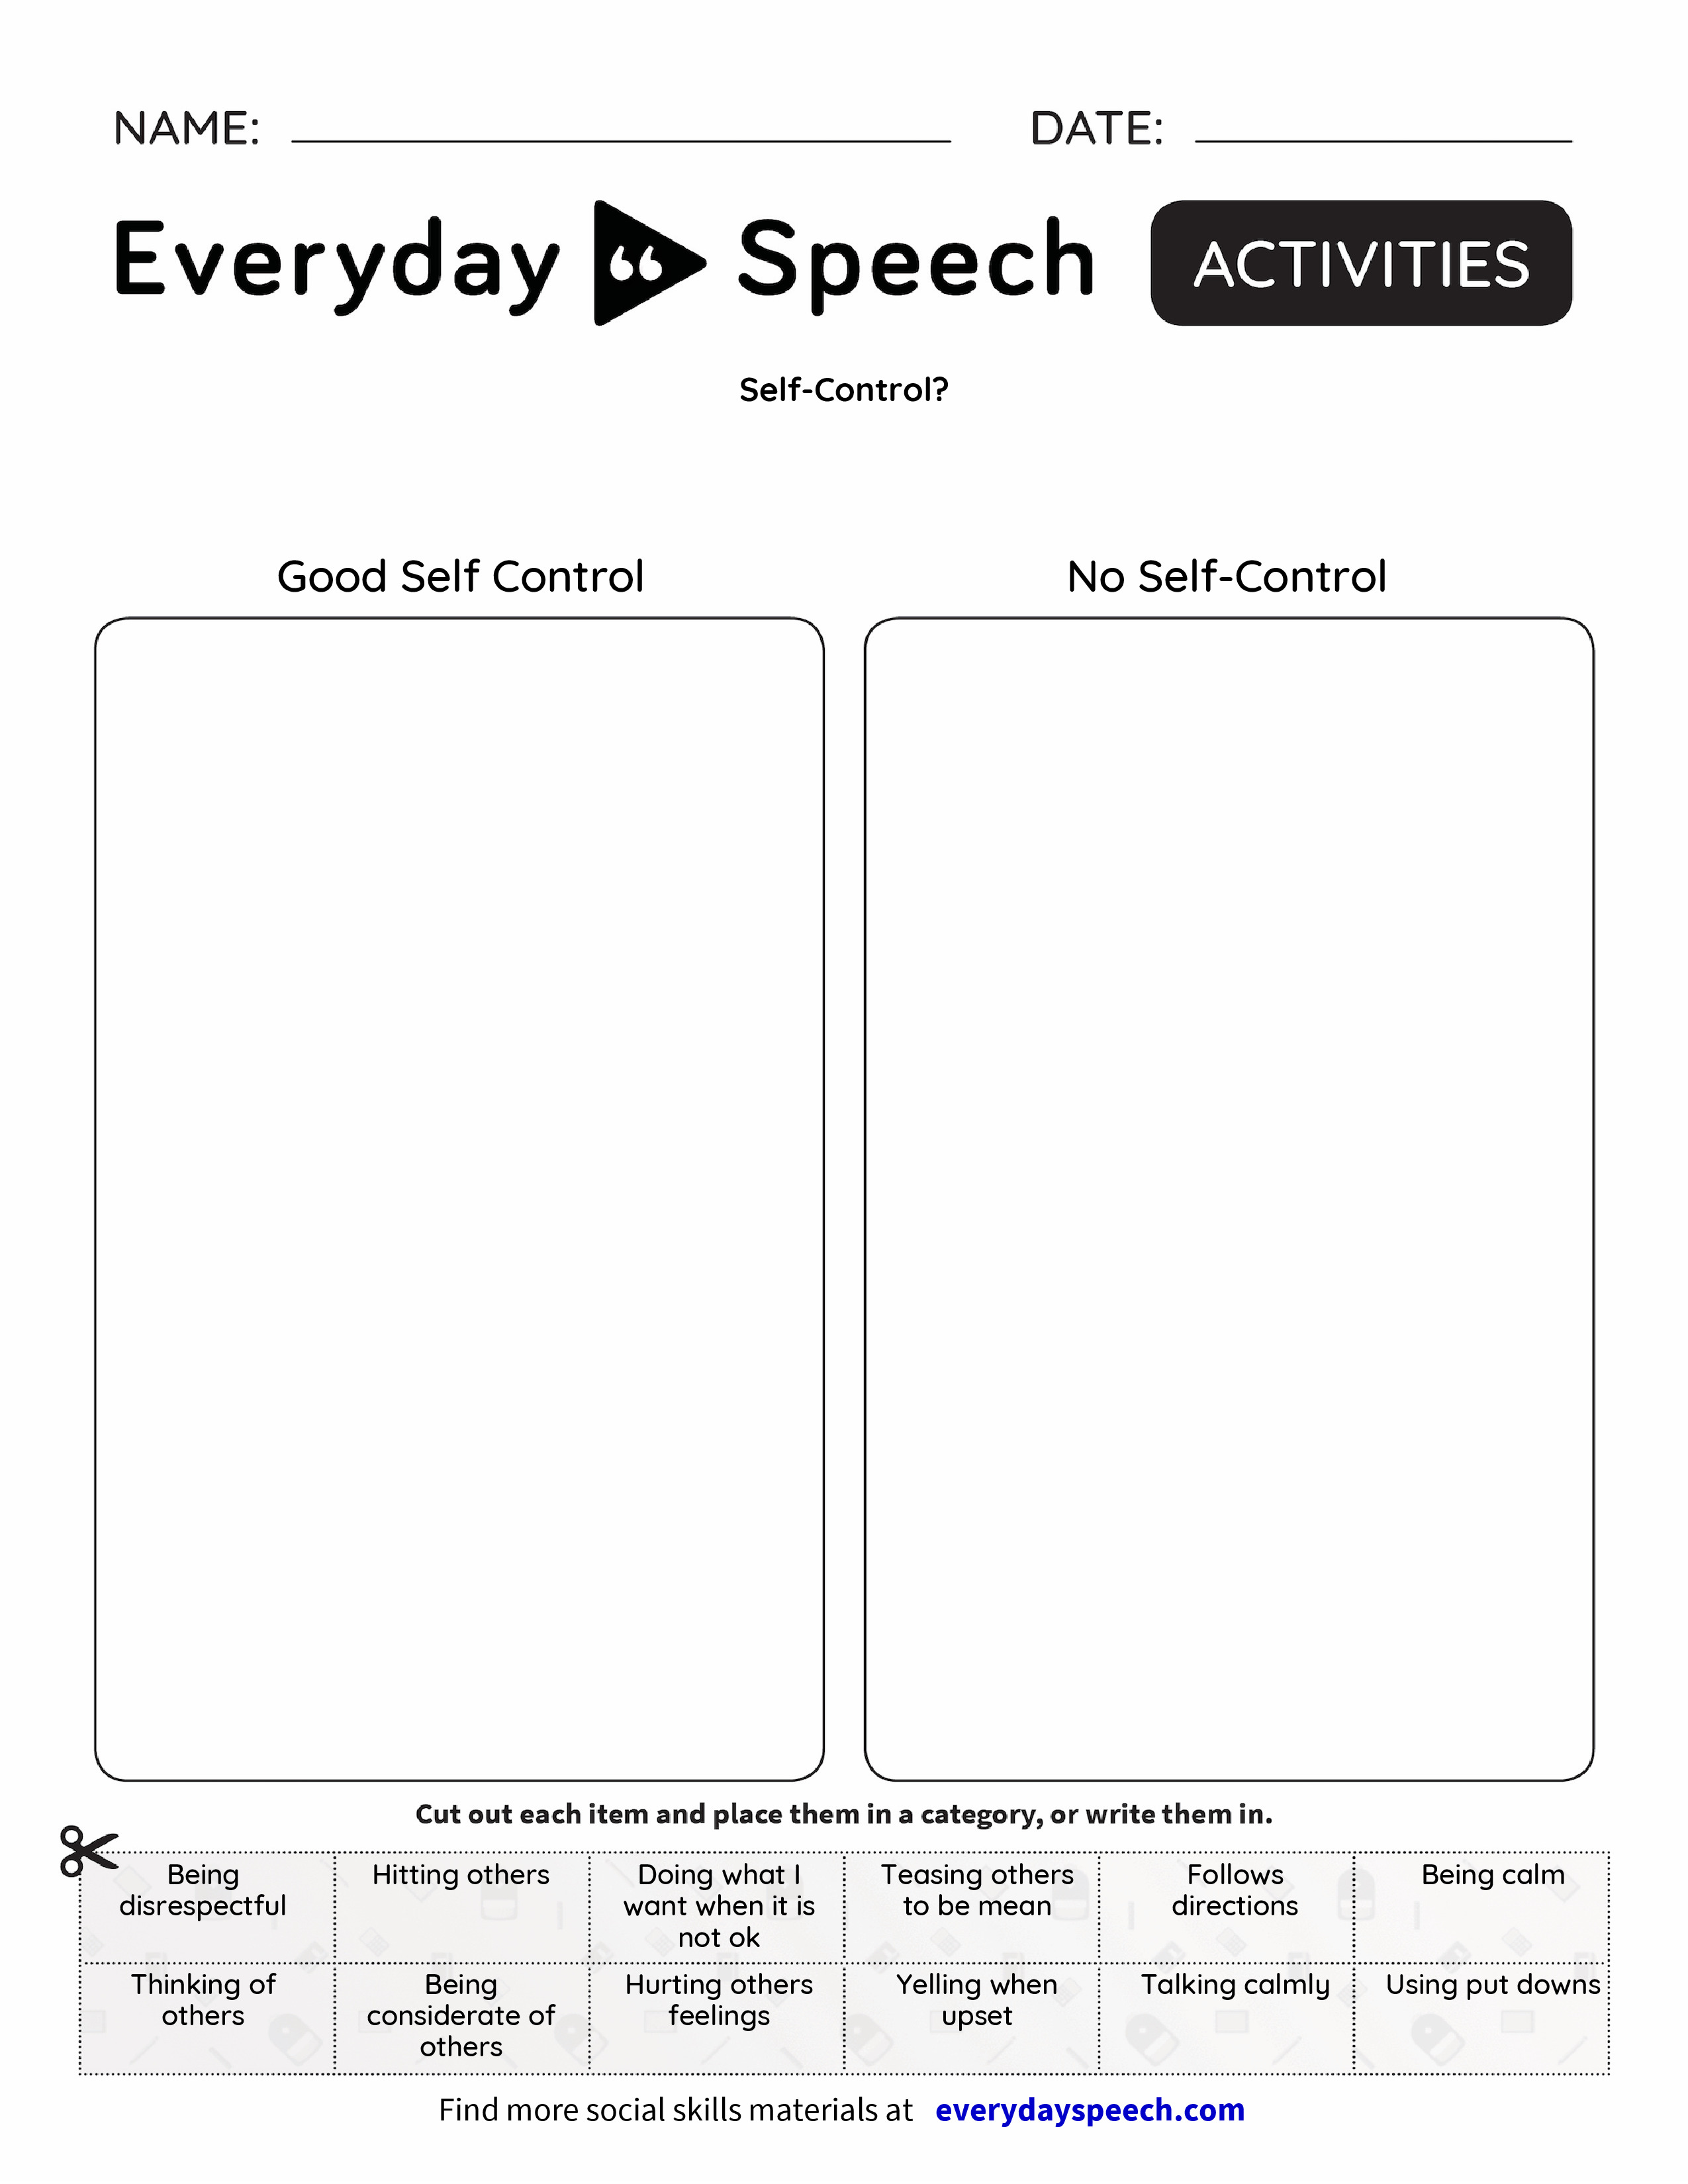 what-can-i-control-free-worksheet-miriam-mogilevsky-lisw